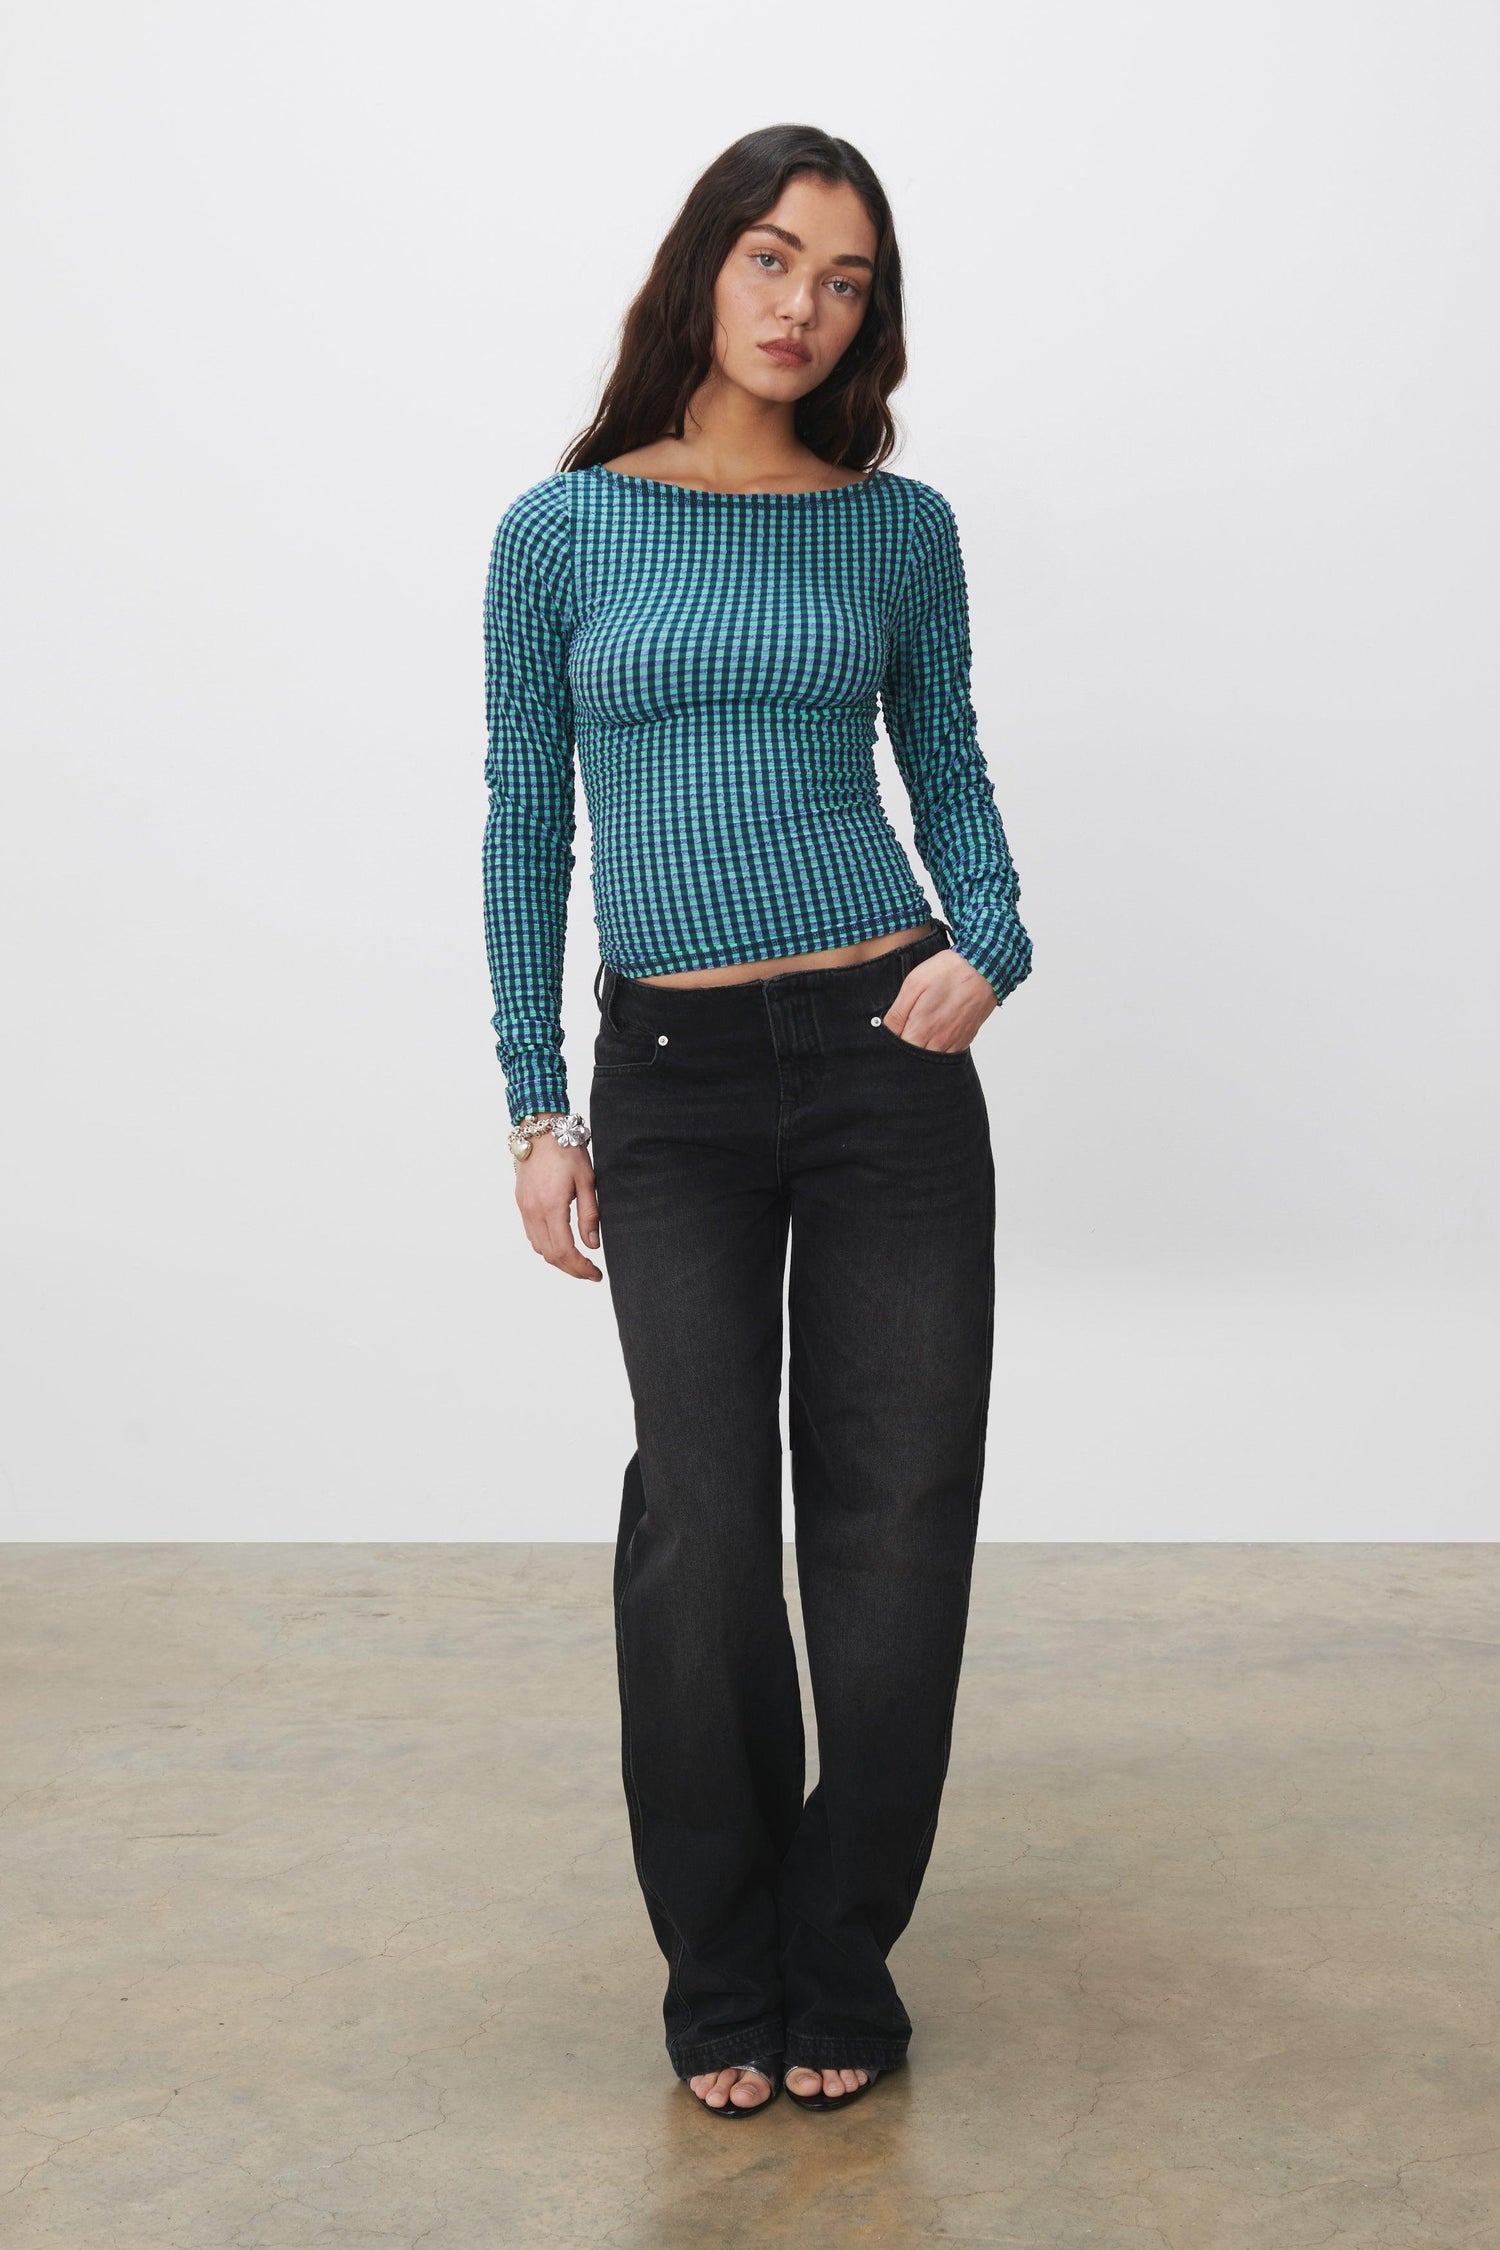 The Cindy Long Sleeve Top, After Eight - Peachy Den